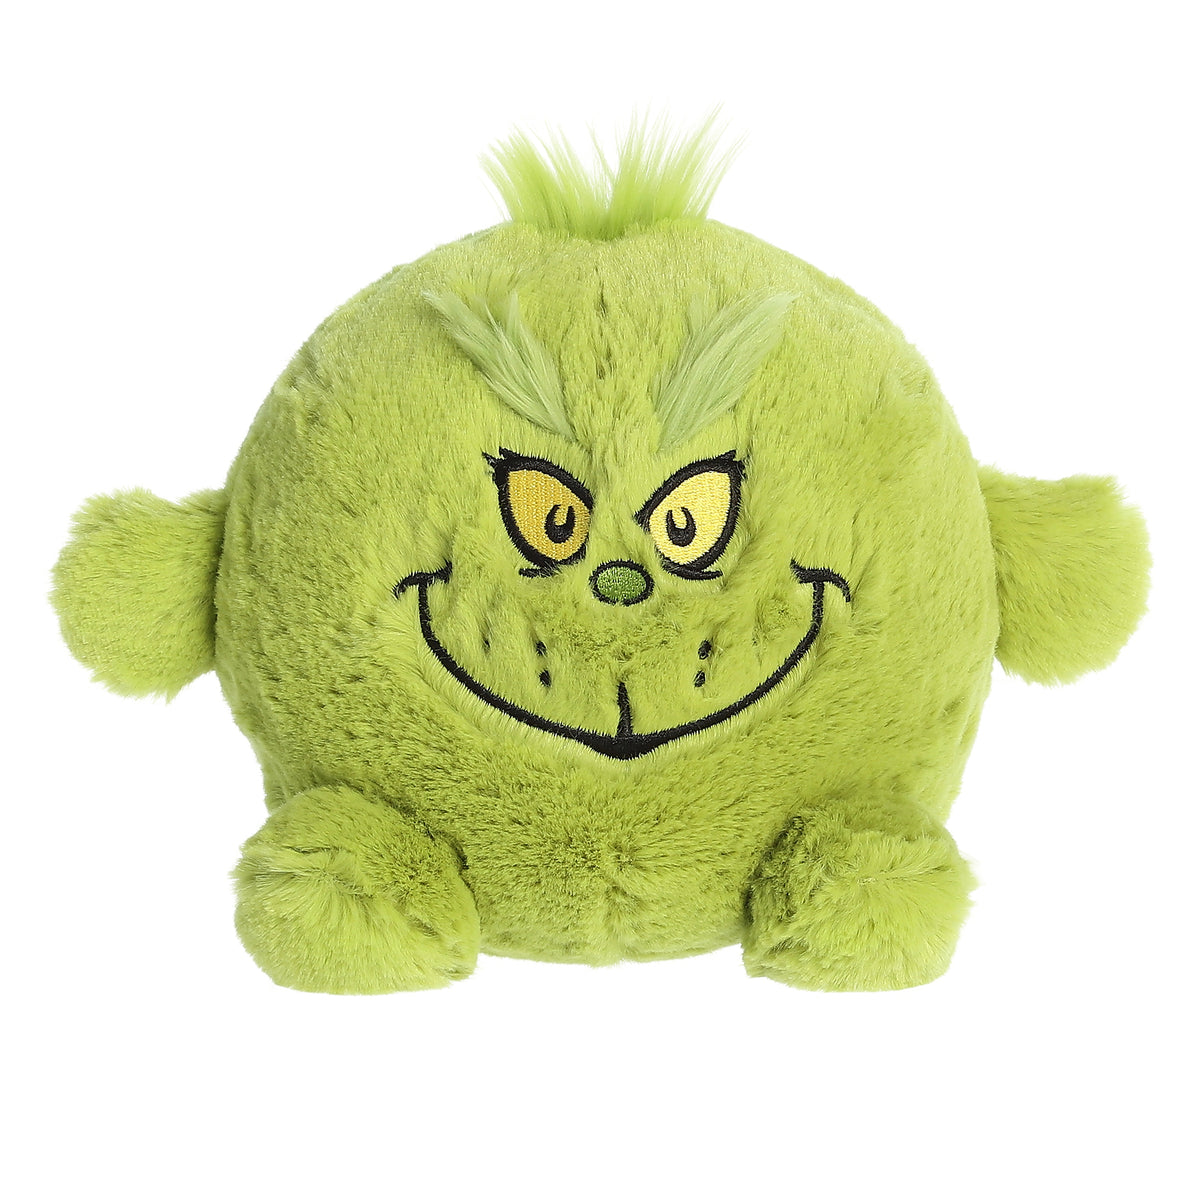 Round Grinch Ball plush with green fur and a mischievous smile, from the Dr. Seuss plushie collection.